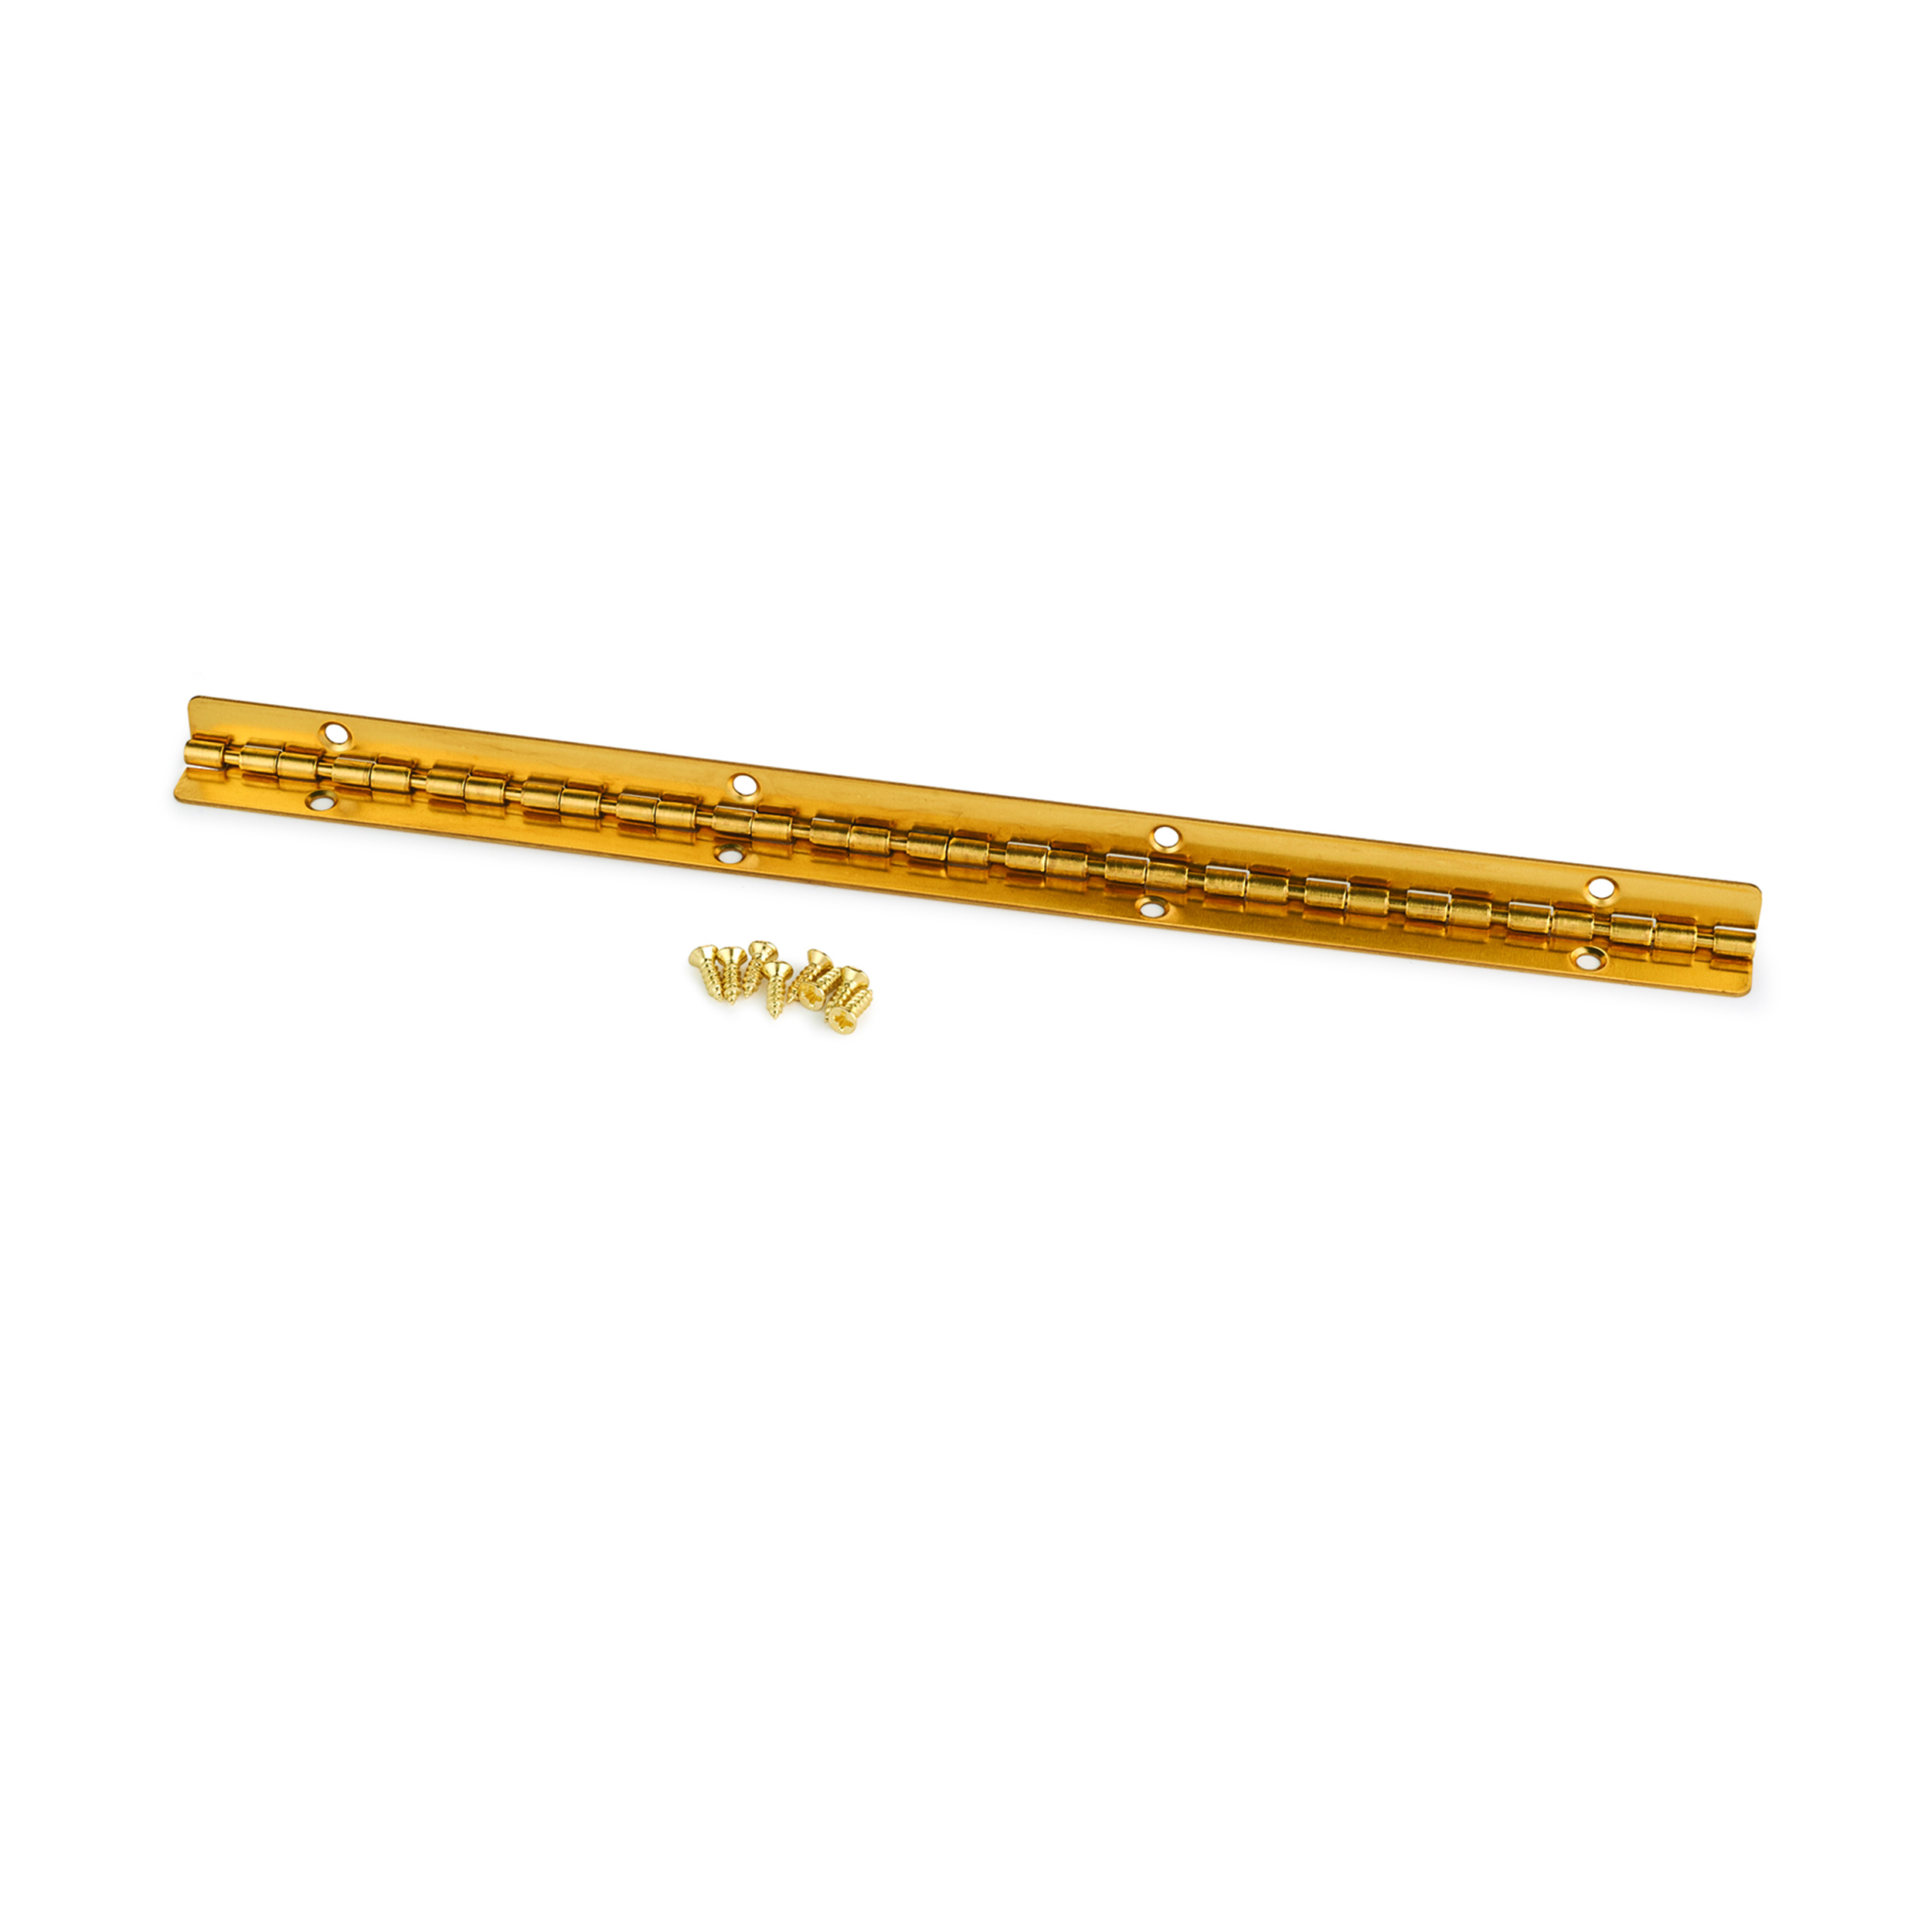 Small Piano Stop Hinge Brass Plated 200mm X 9mm